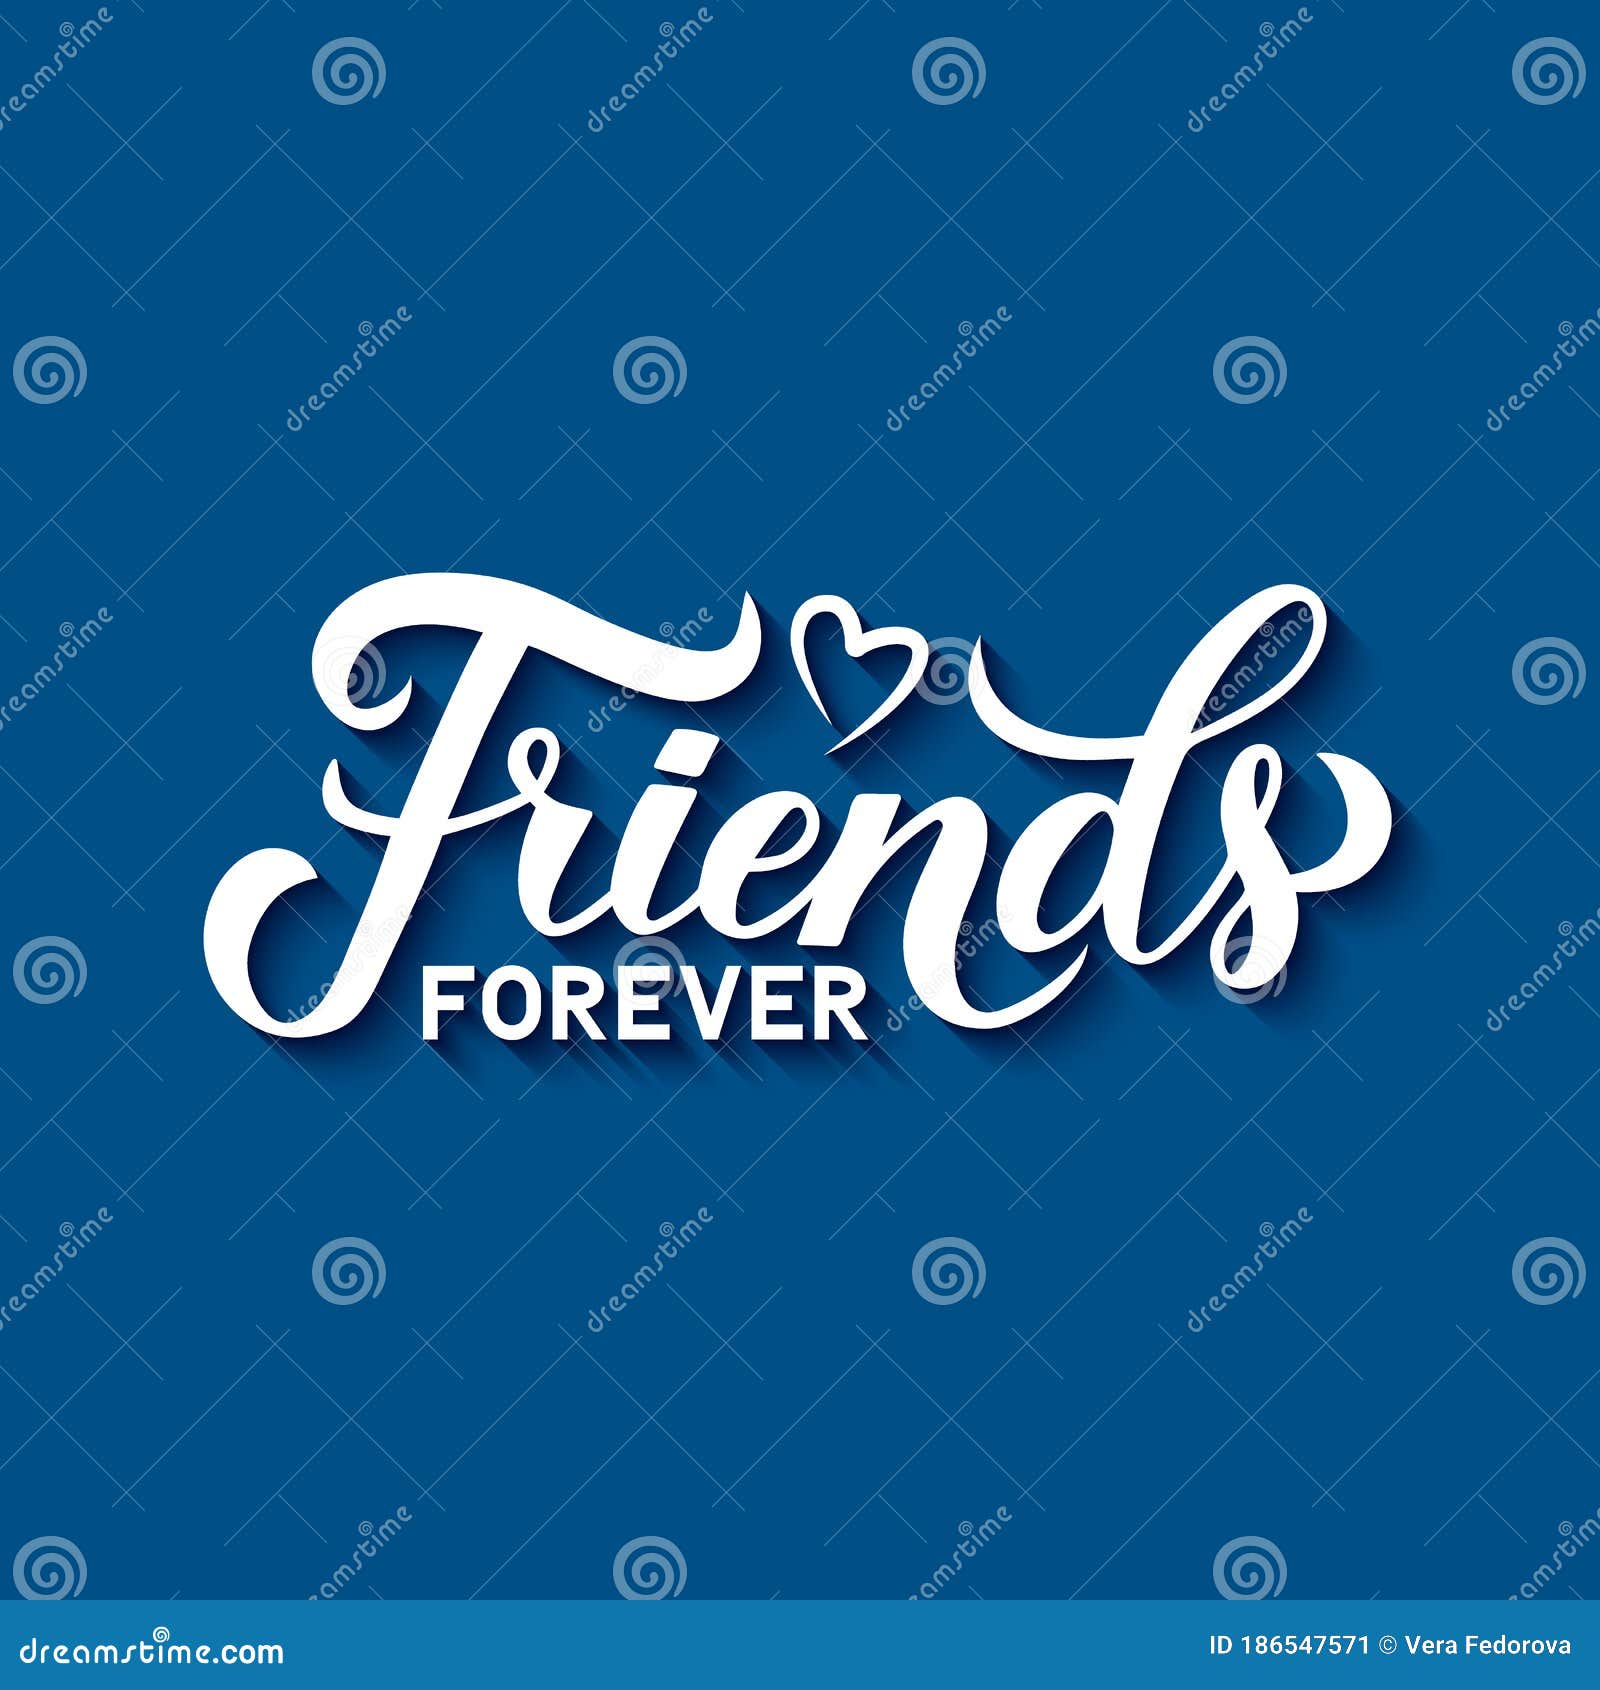 Friends Forever Calligraphy Hand Lettering on Blue Background. Friendship  Day Inspirational Quote Stock Vector - Illustration of banner, enjoyment:  186547571